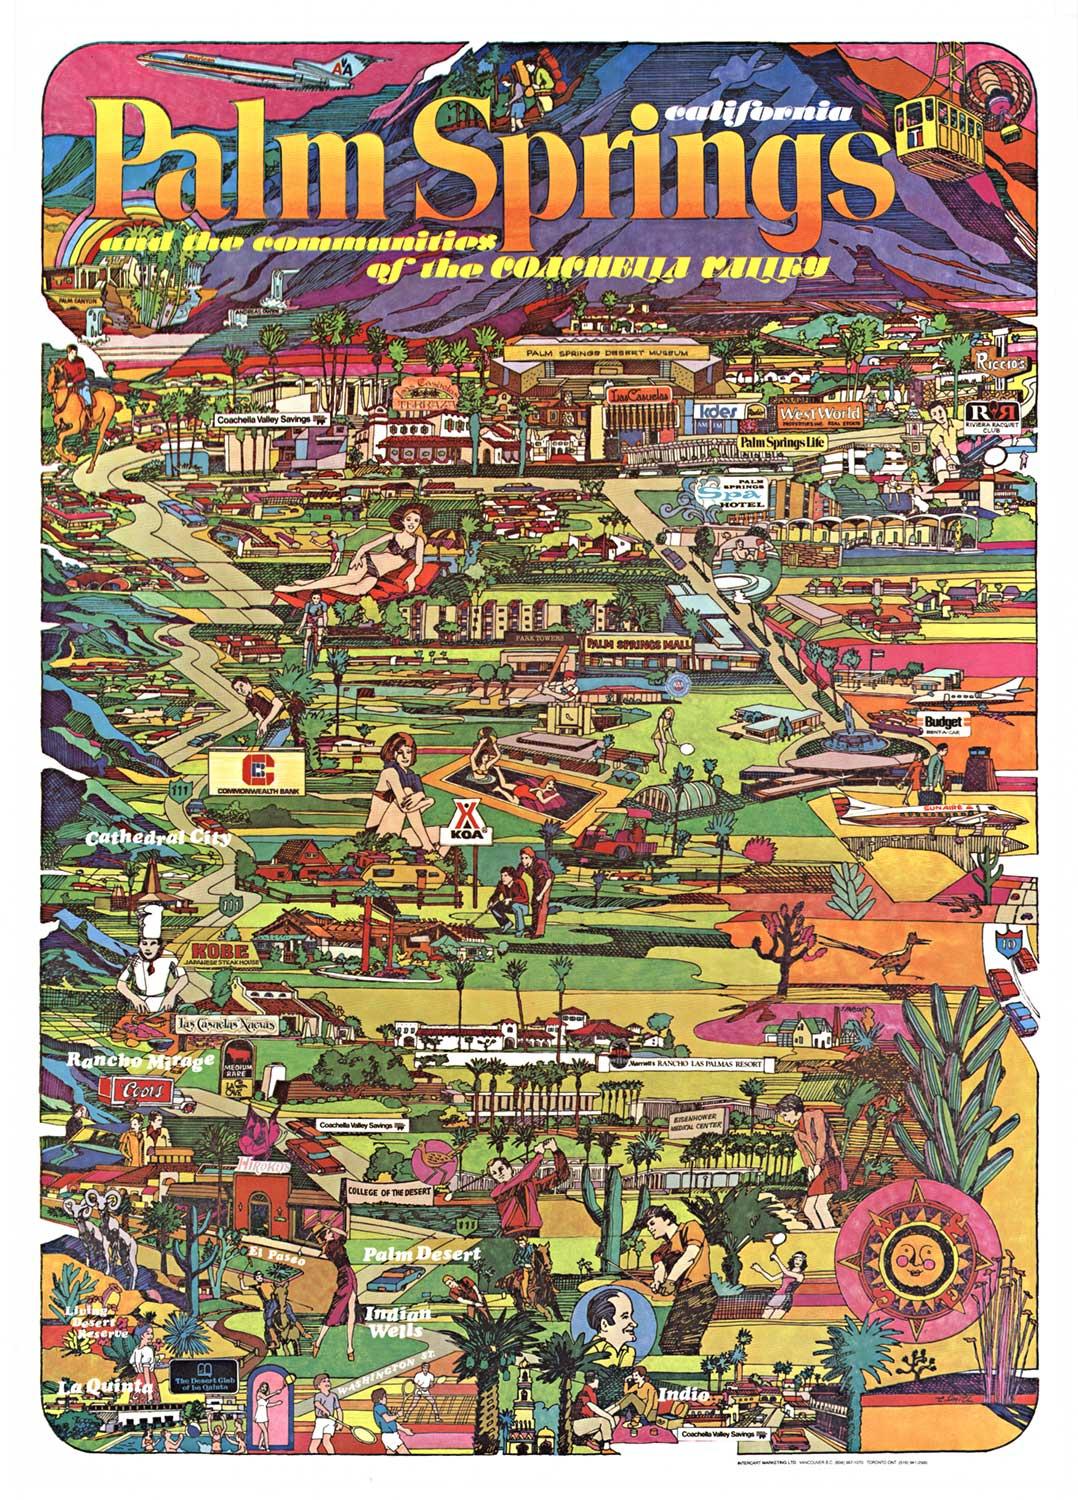 E. Smith Landscape Print - Original Palm Springs and The Communities of The Coachella Valley vintage poster